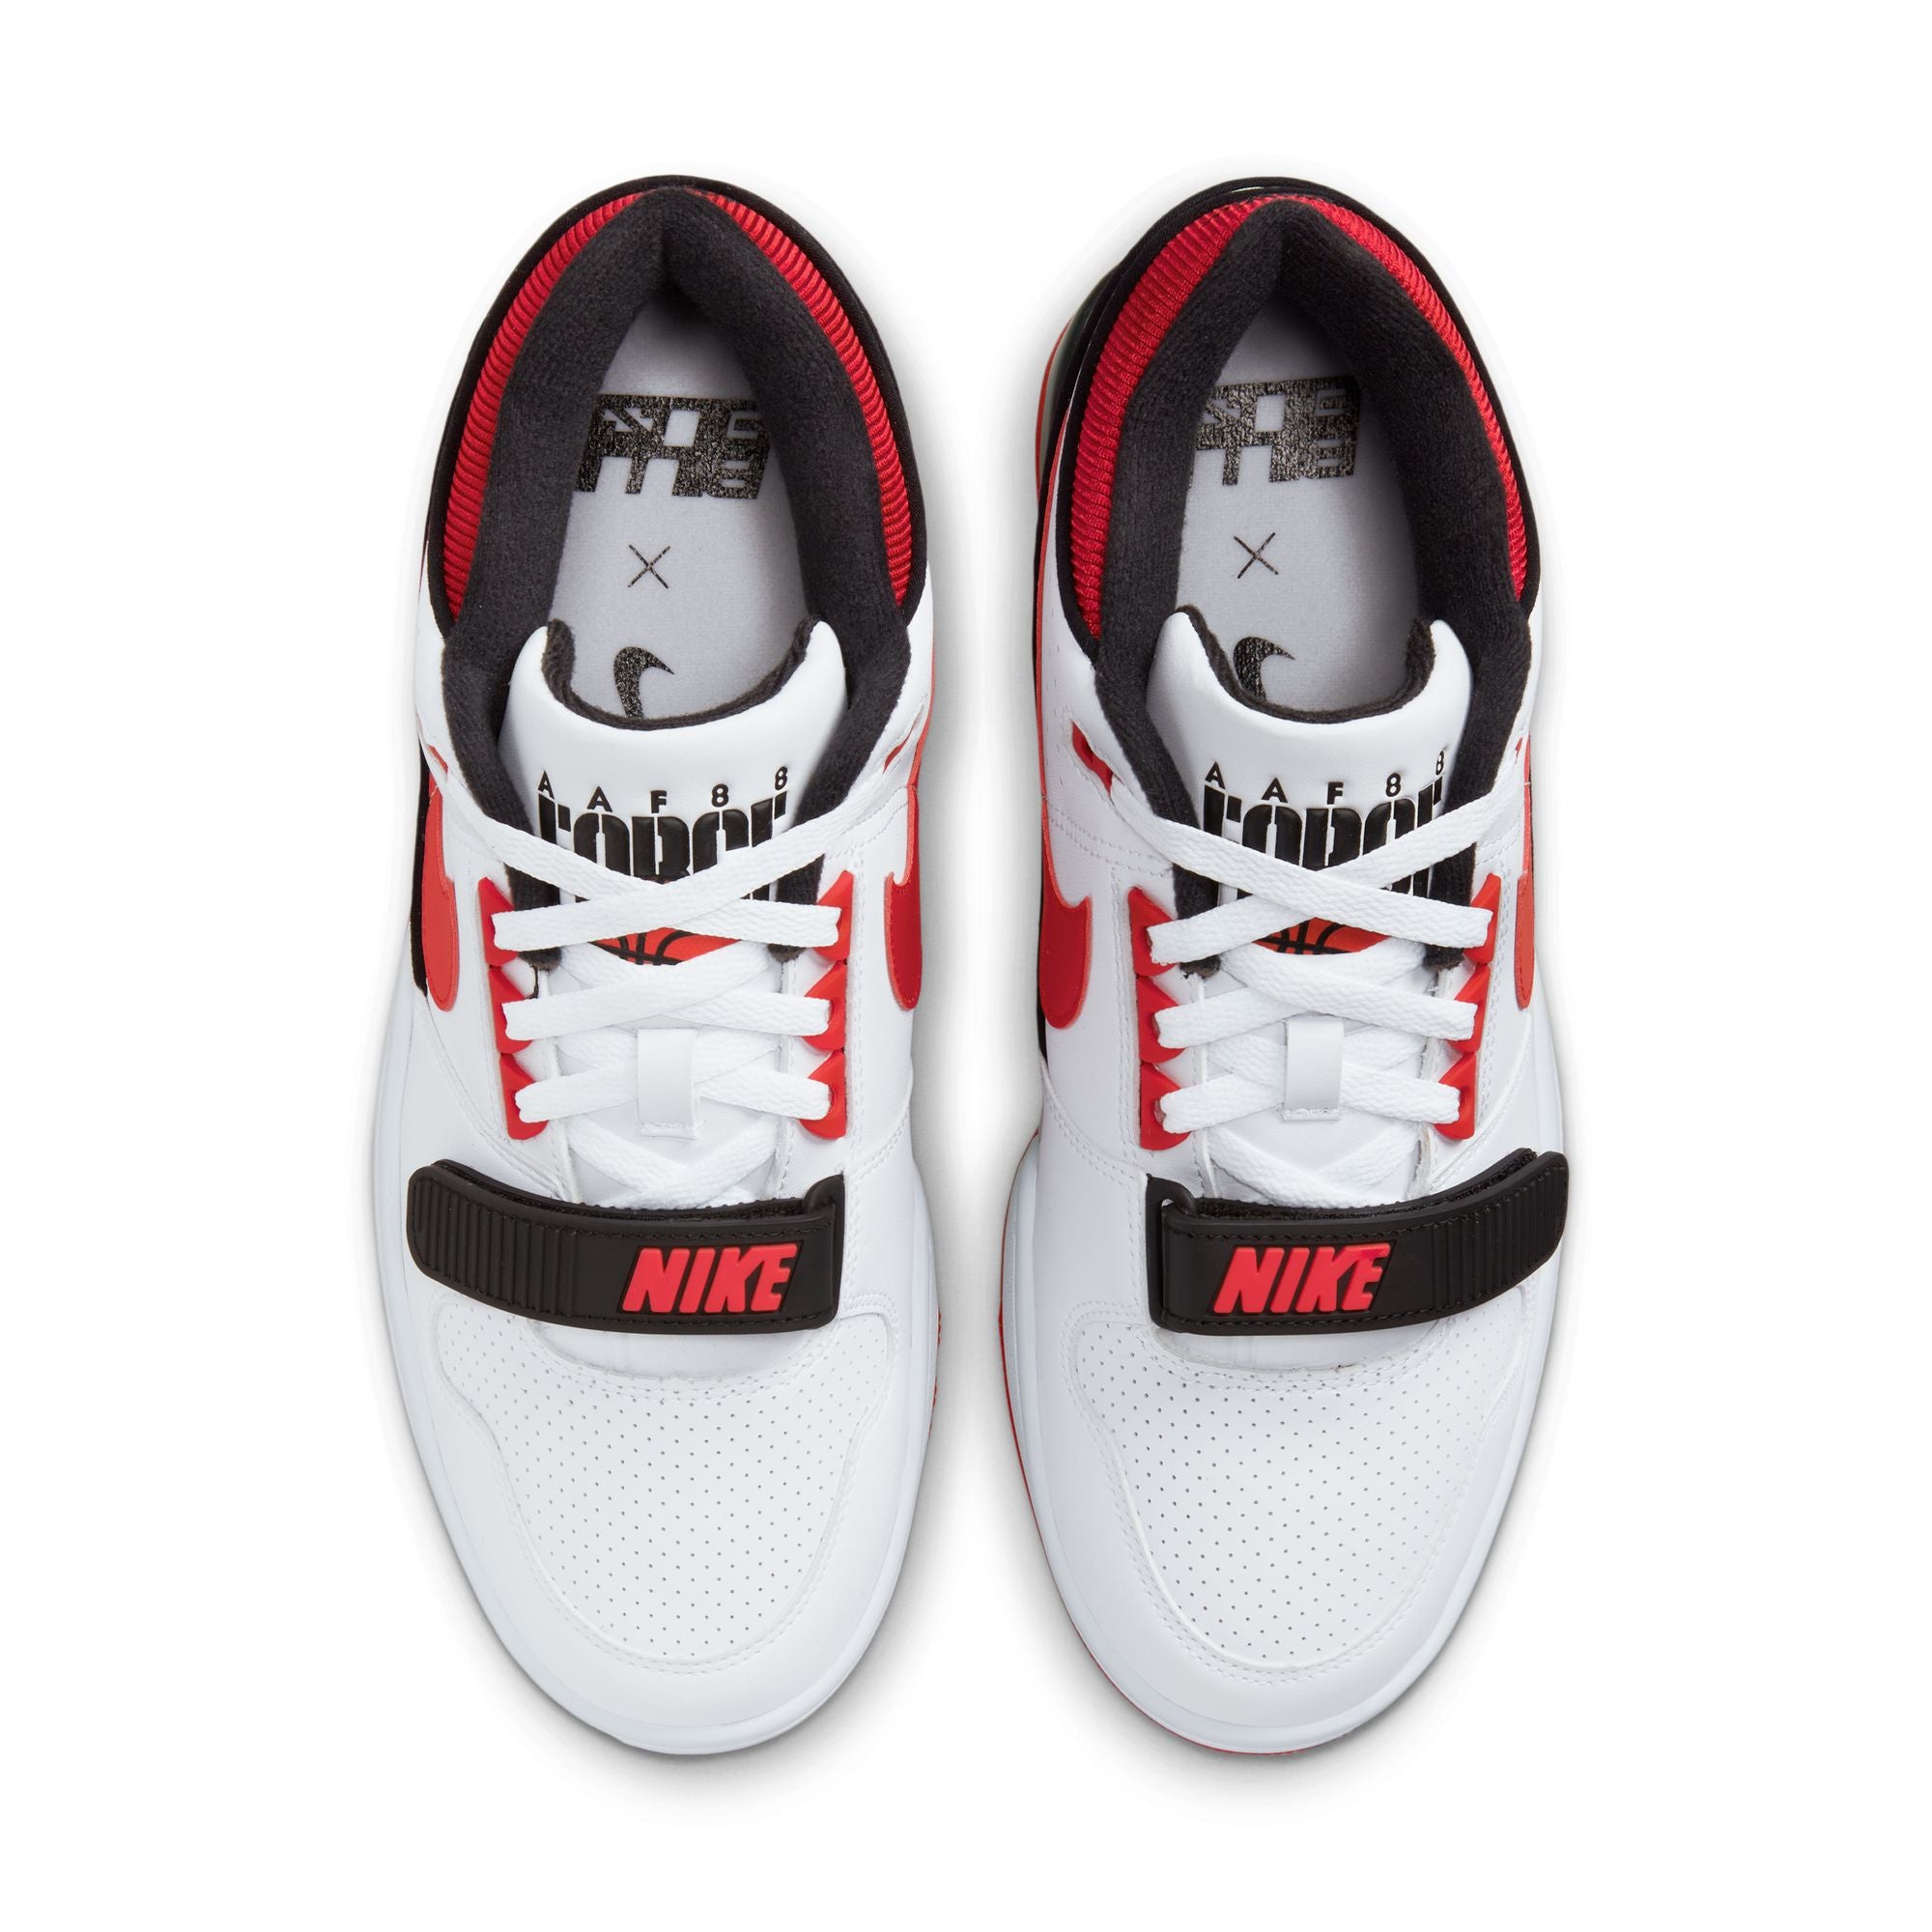 AIR ALPHA FORCE 88 SP - WHITE / FIRE RED DZ6763-101 I MOMENTUM 